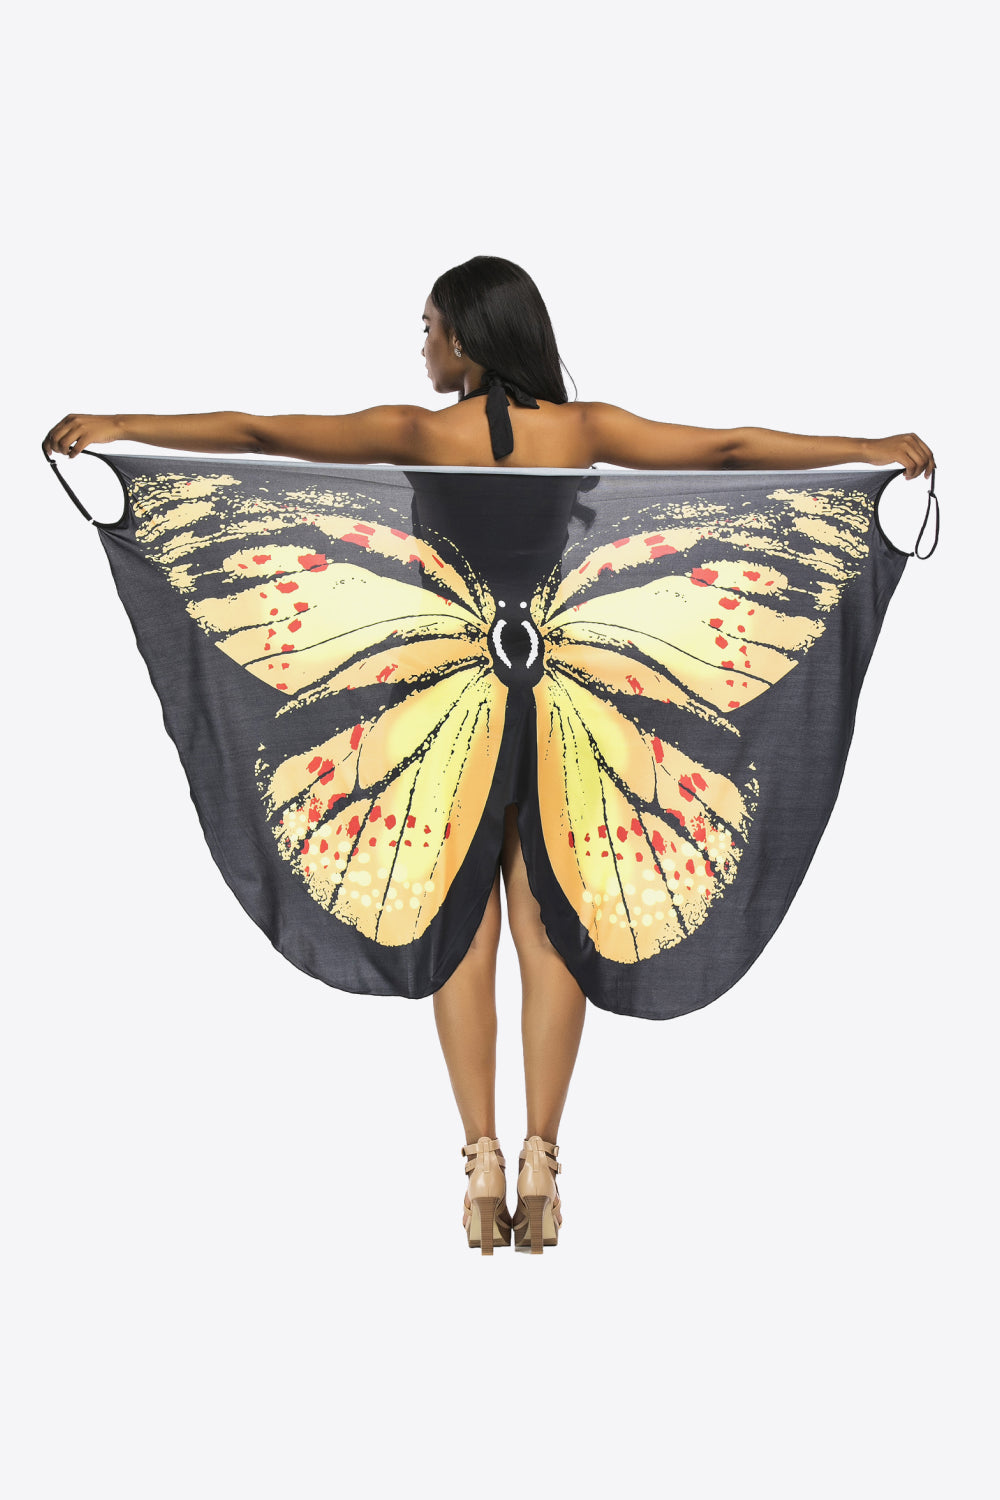 Butterfly Swimwear Cover Up Convertible Spaghetti Strap Dress or Sarong Skirt